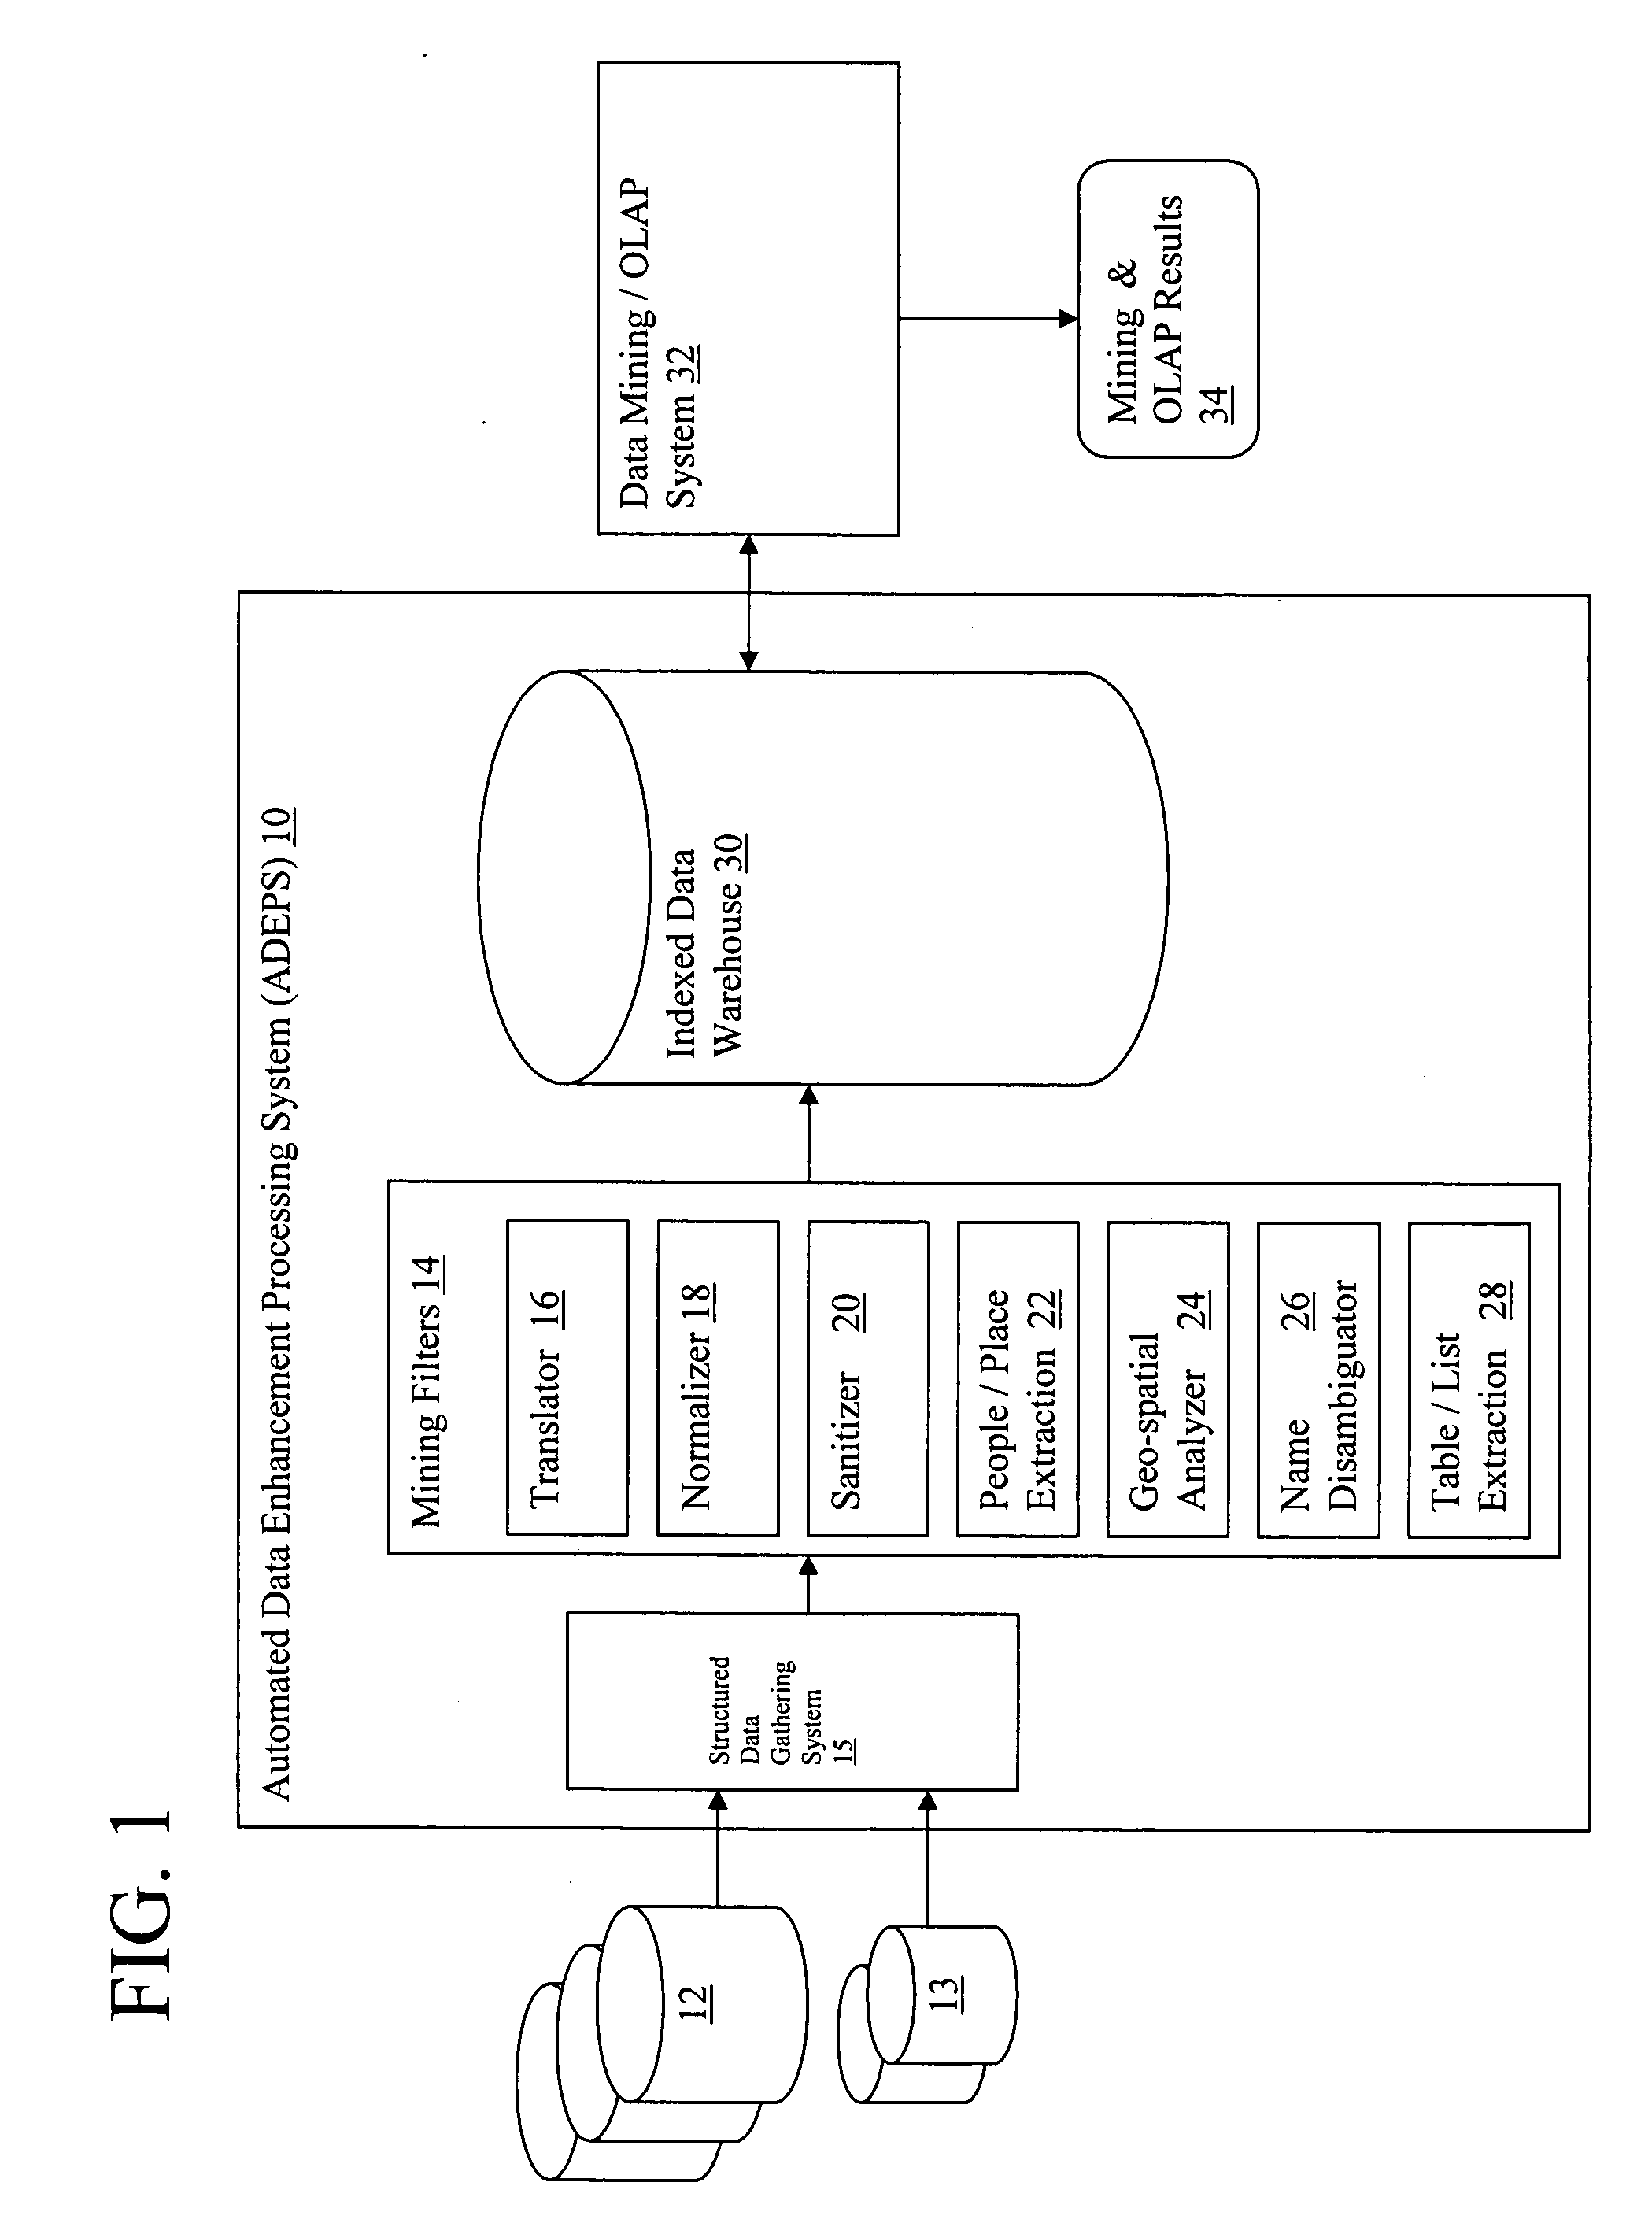 System and method for automating data normalization using text analytics